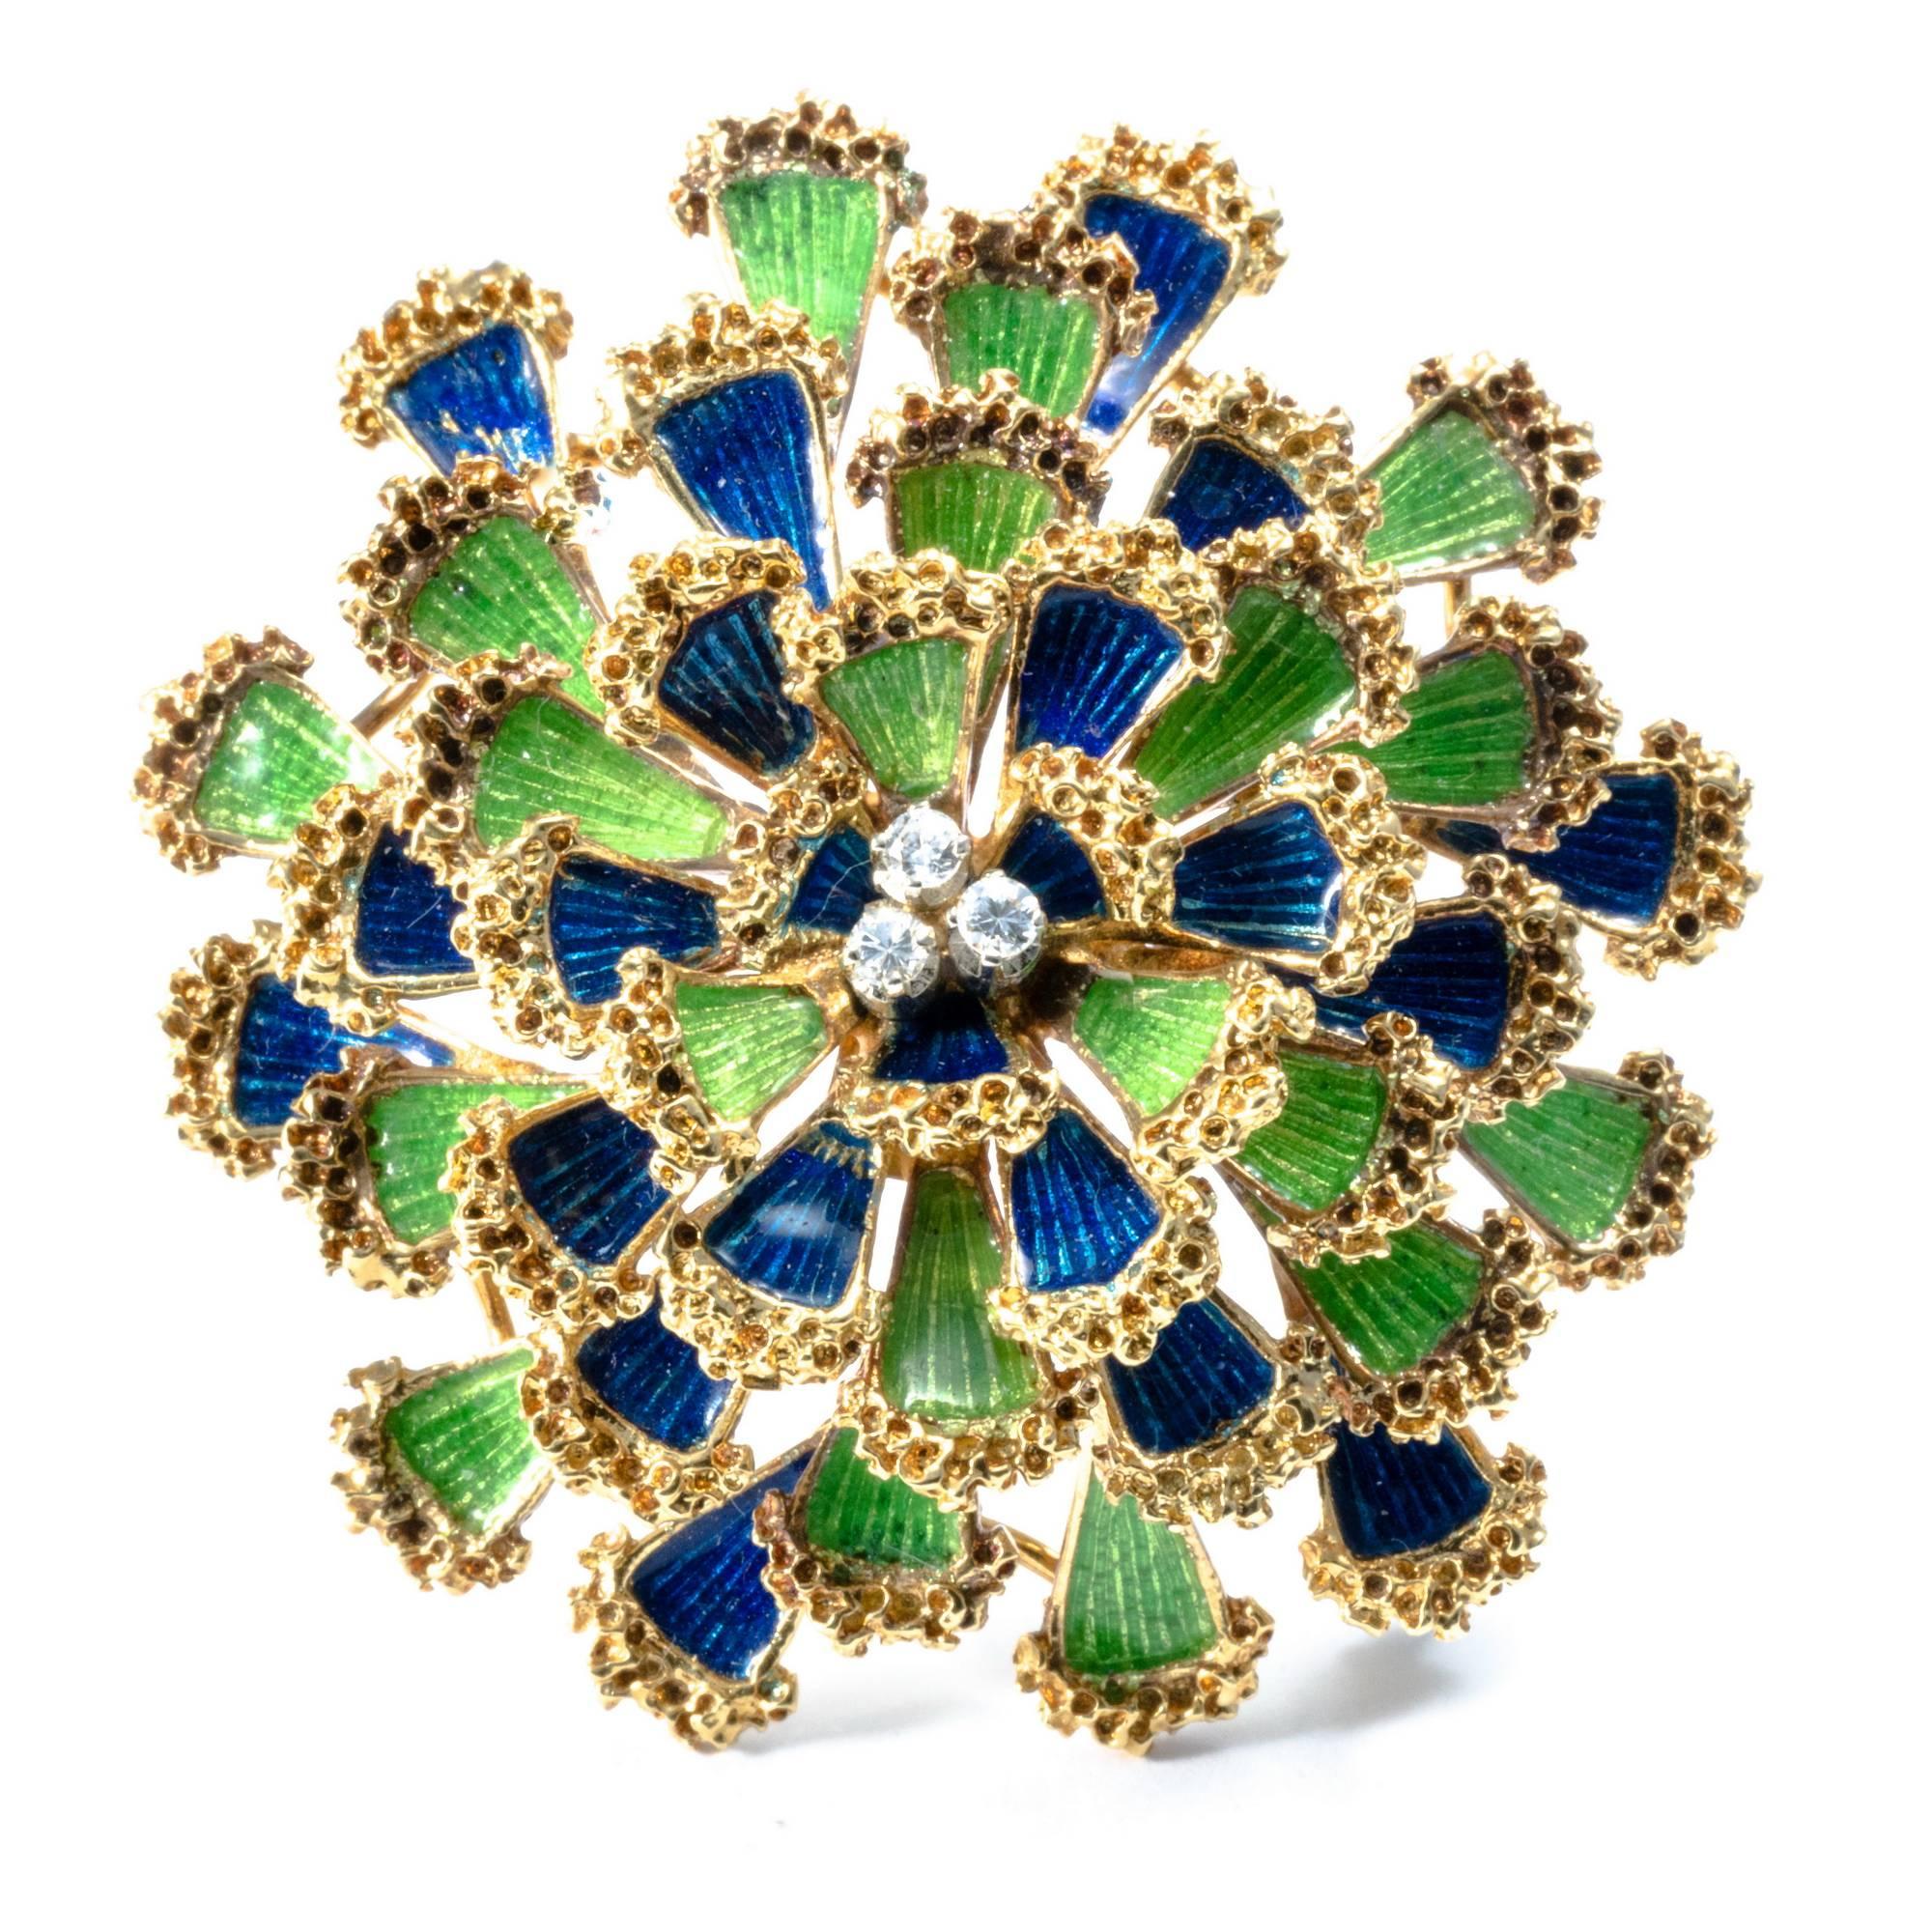 This yellow gold 1950's dome floral brooch is lively and appealing with it's bright blu and green enameled petals, enlightened by 3 diamonds. The pin can be easily wore as a pendant, with an appropriate necklace.